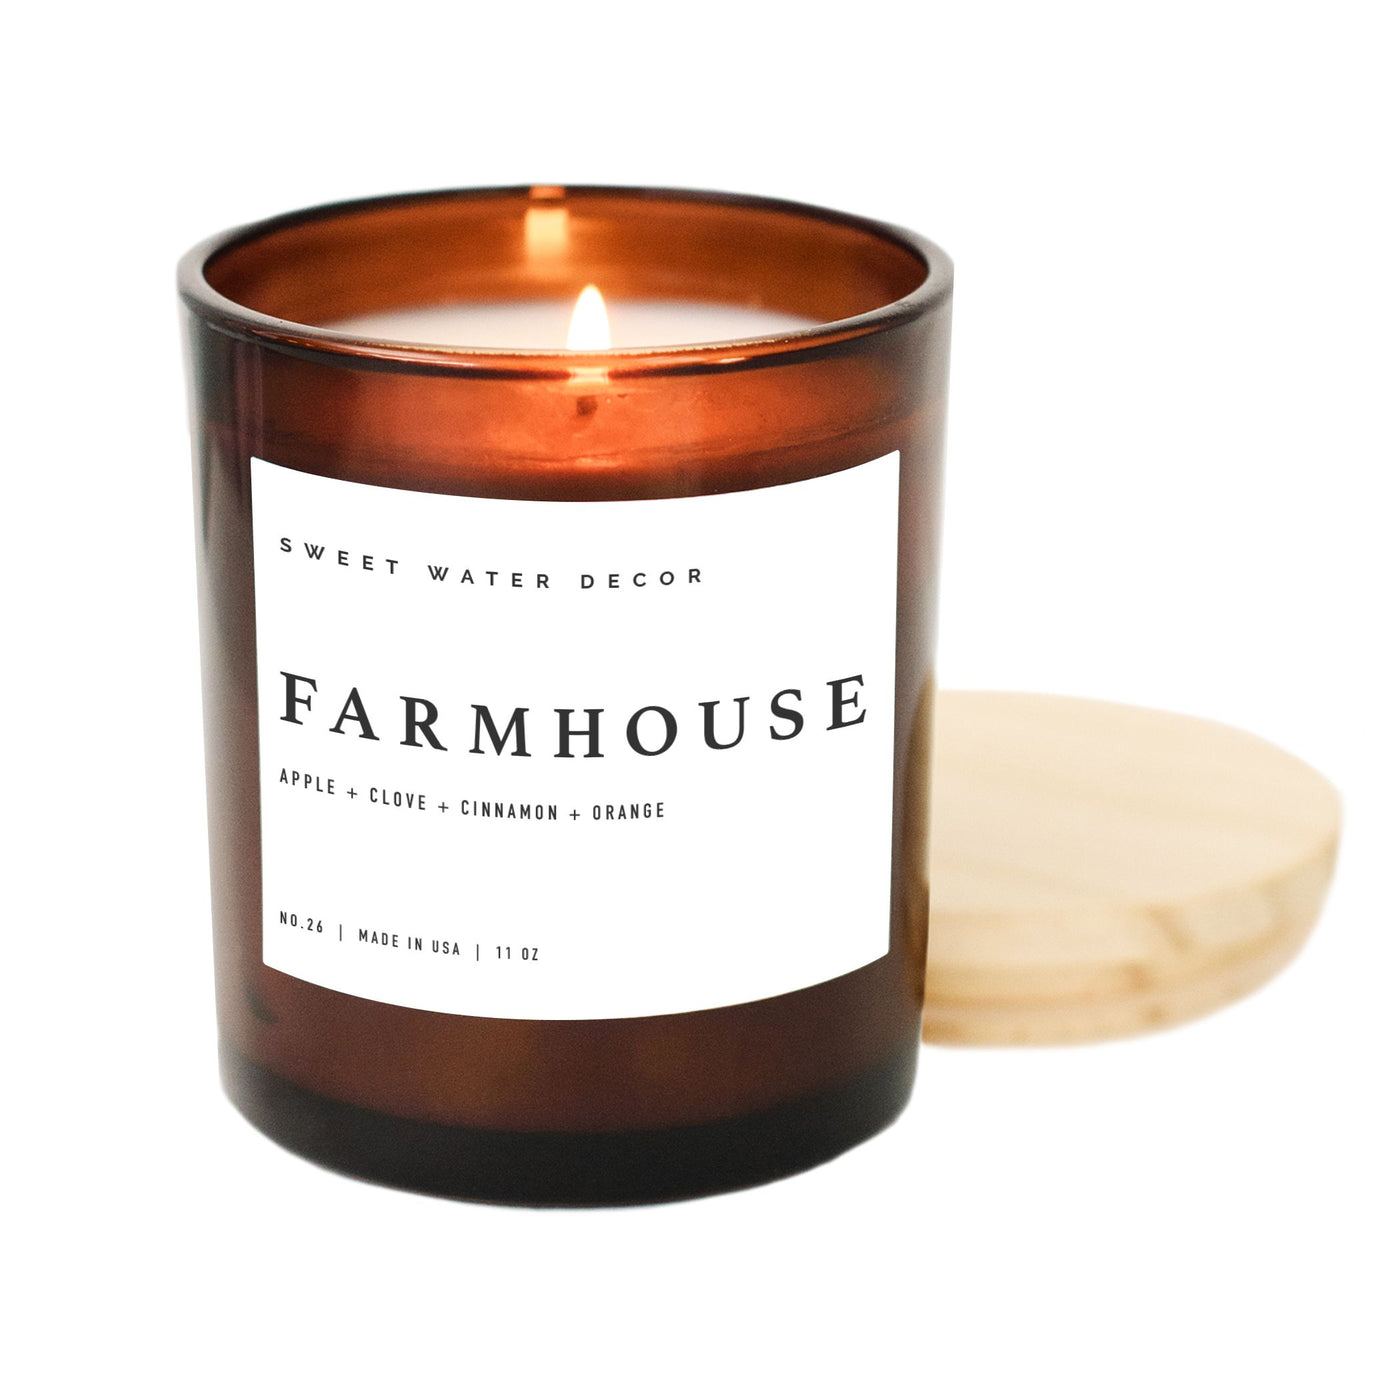 Farmhouse Soy Candle - Amber Jar - 11 oz - Sweet Water Decor - Candles